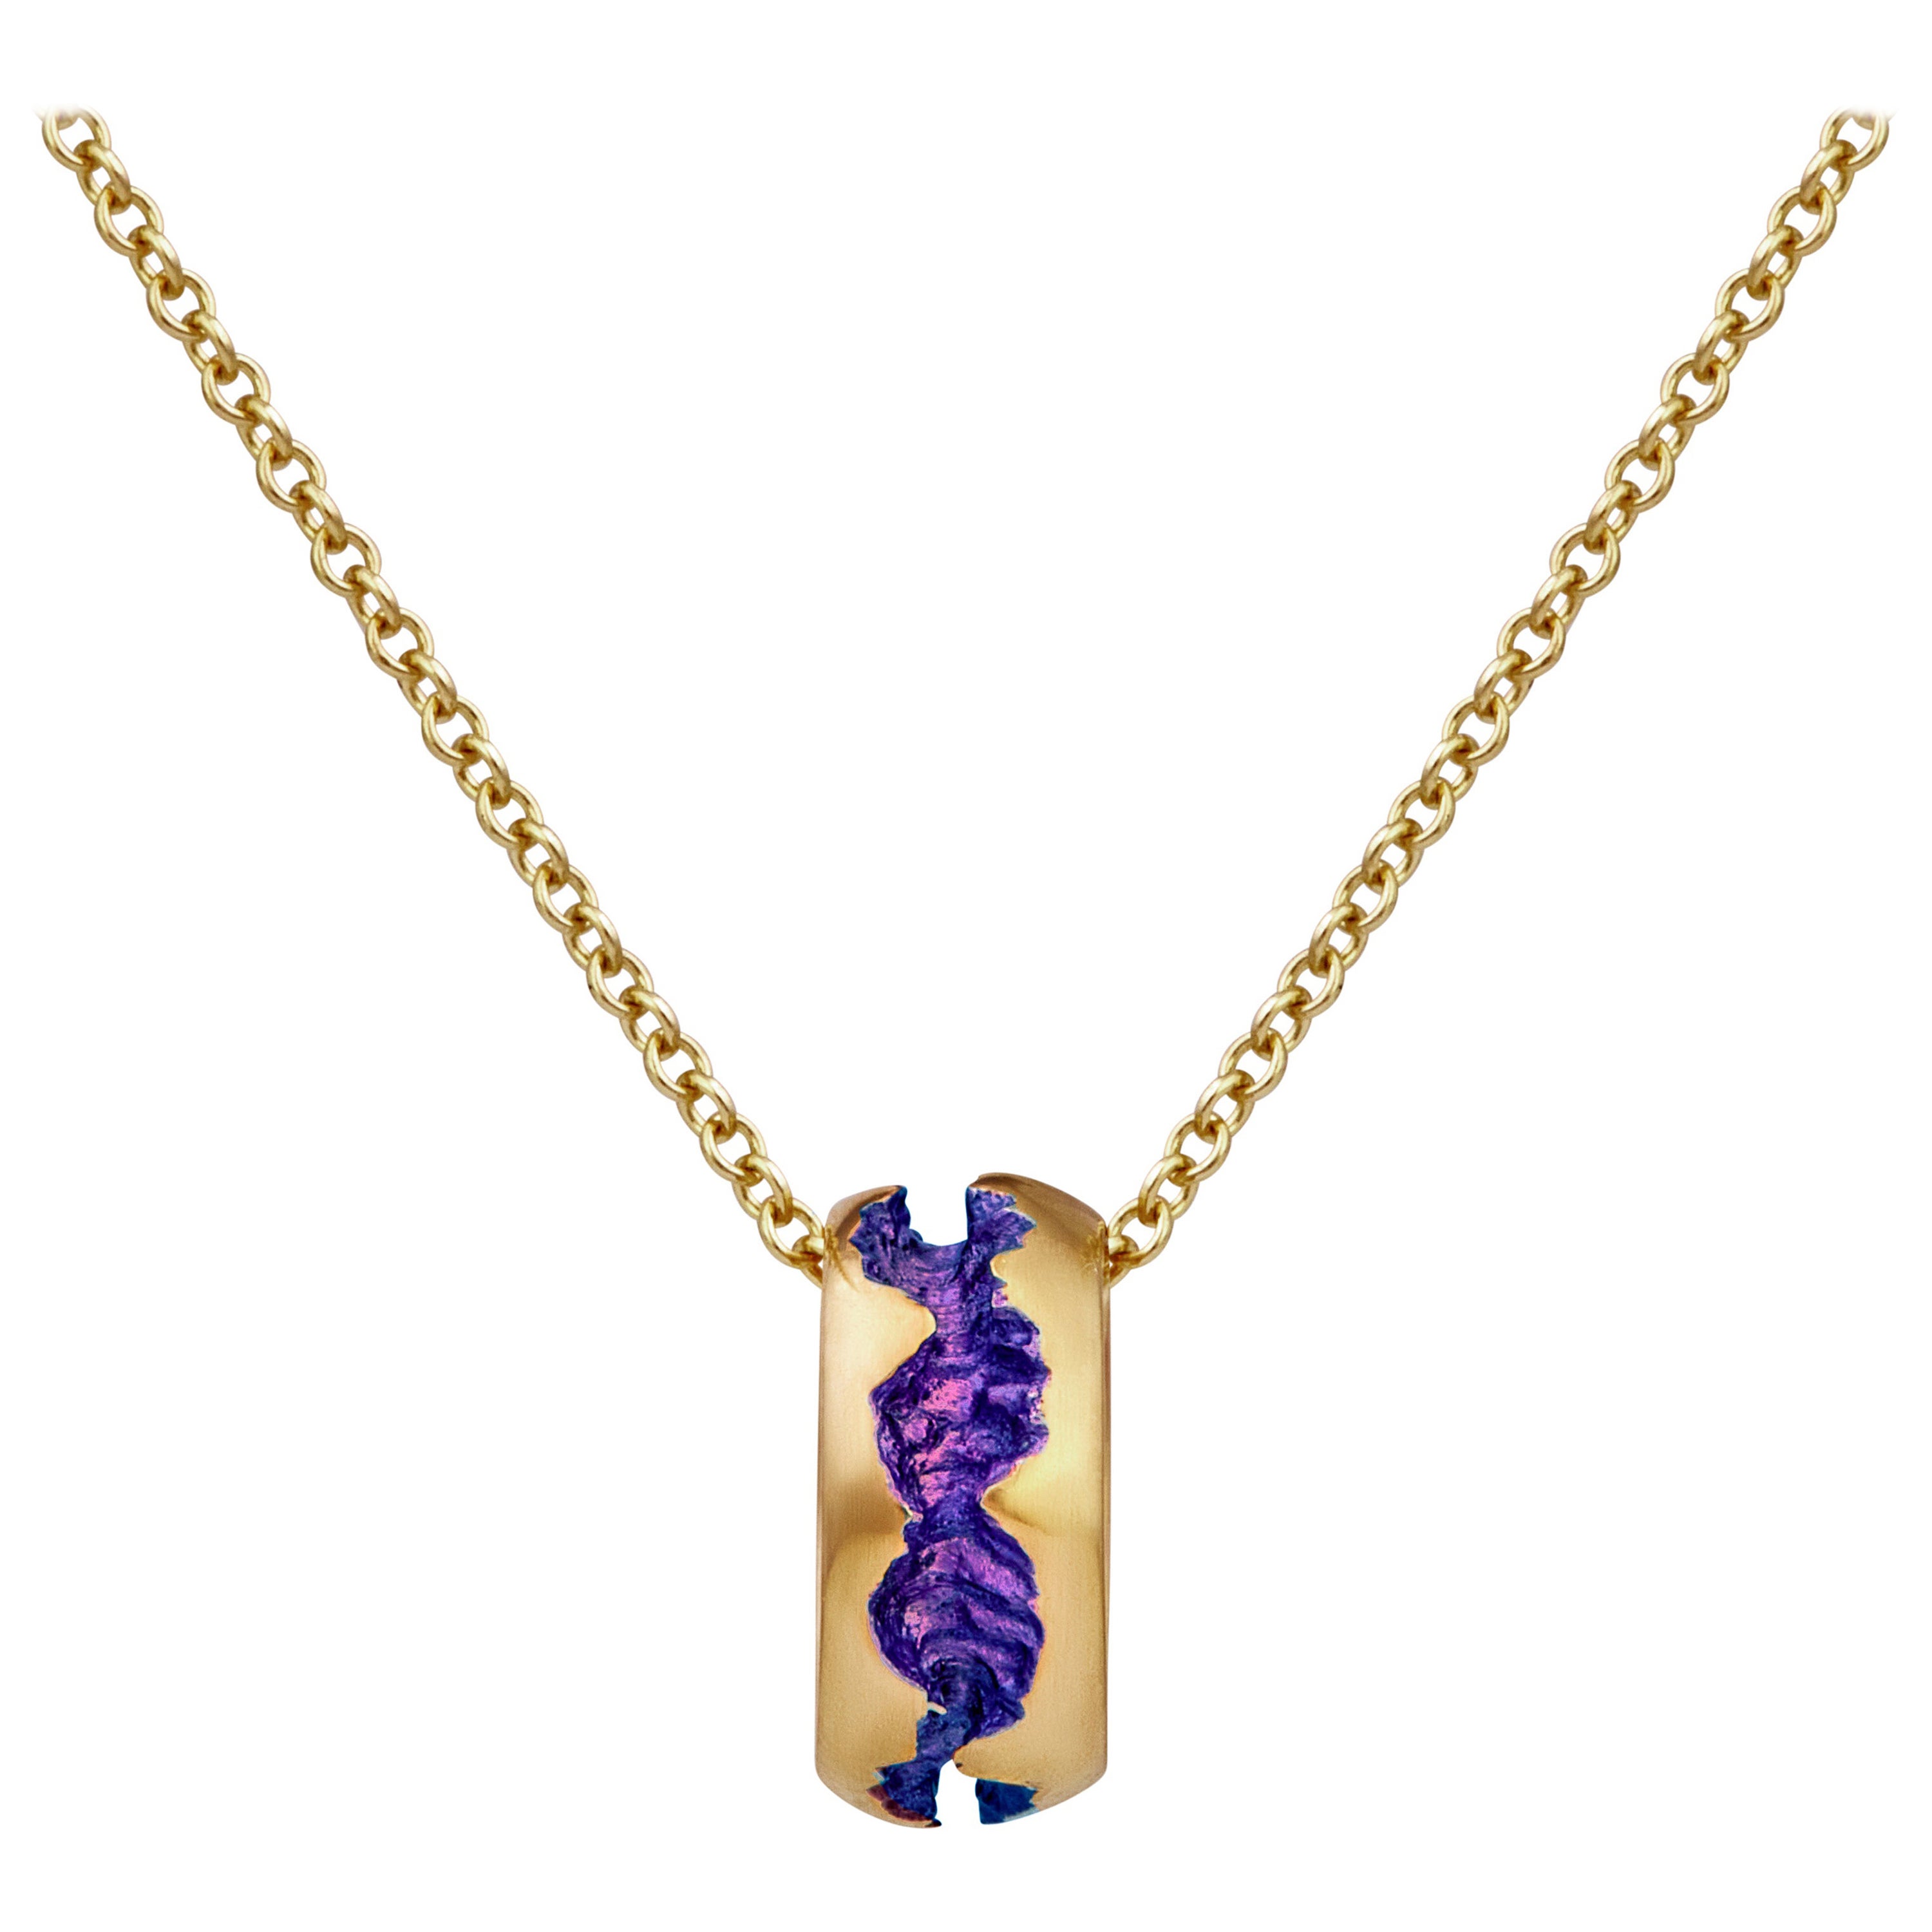  Rock Pool 9 Karat Yellow Gold Purple Spinner Necklace For Sale